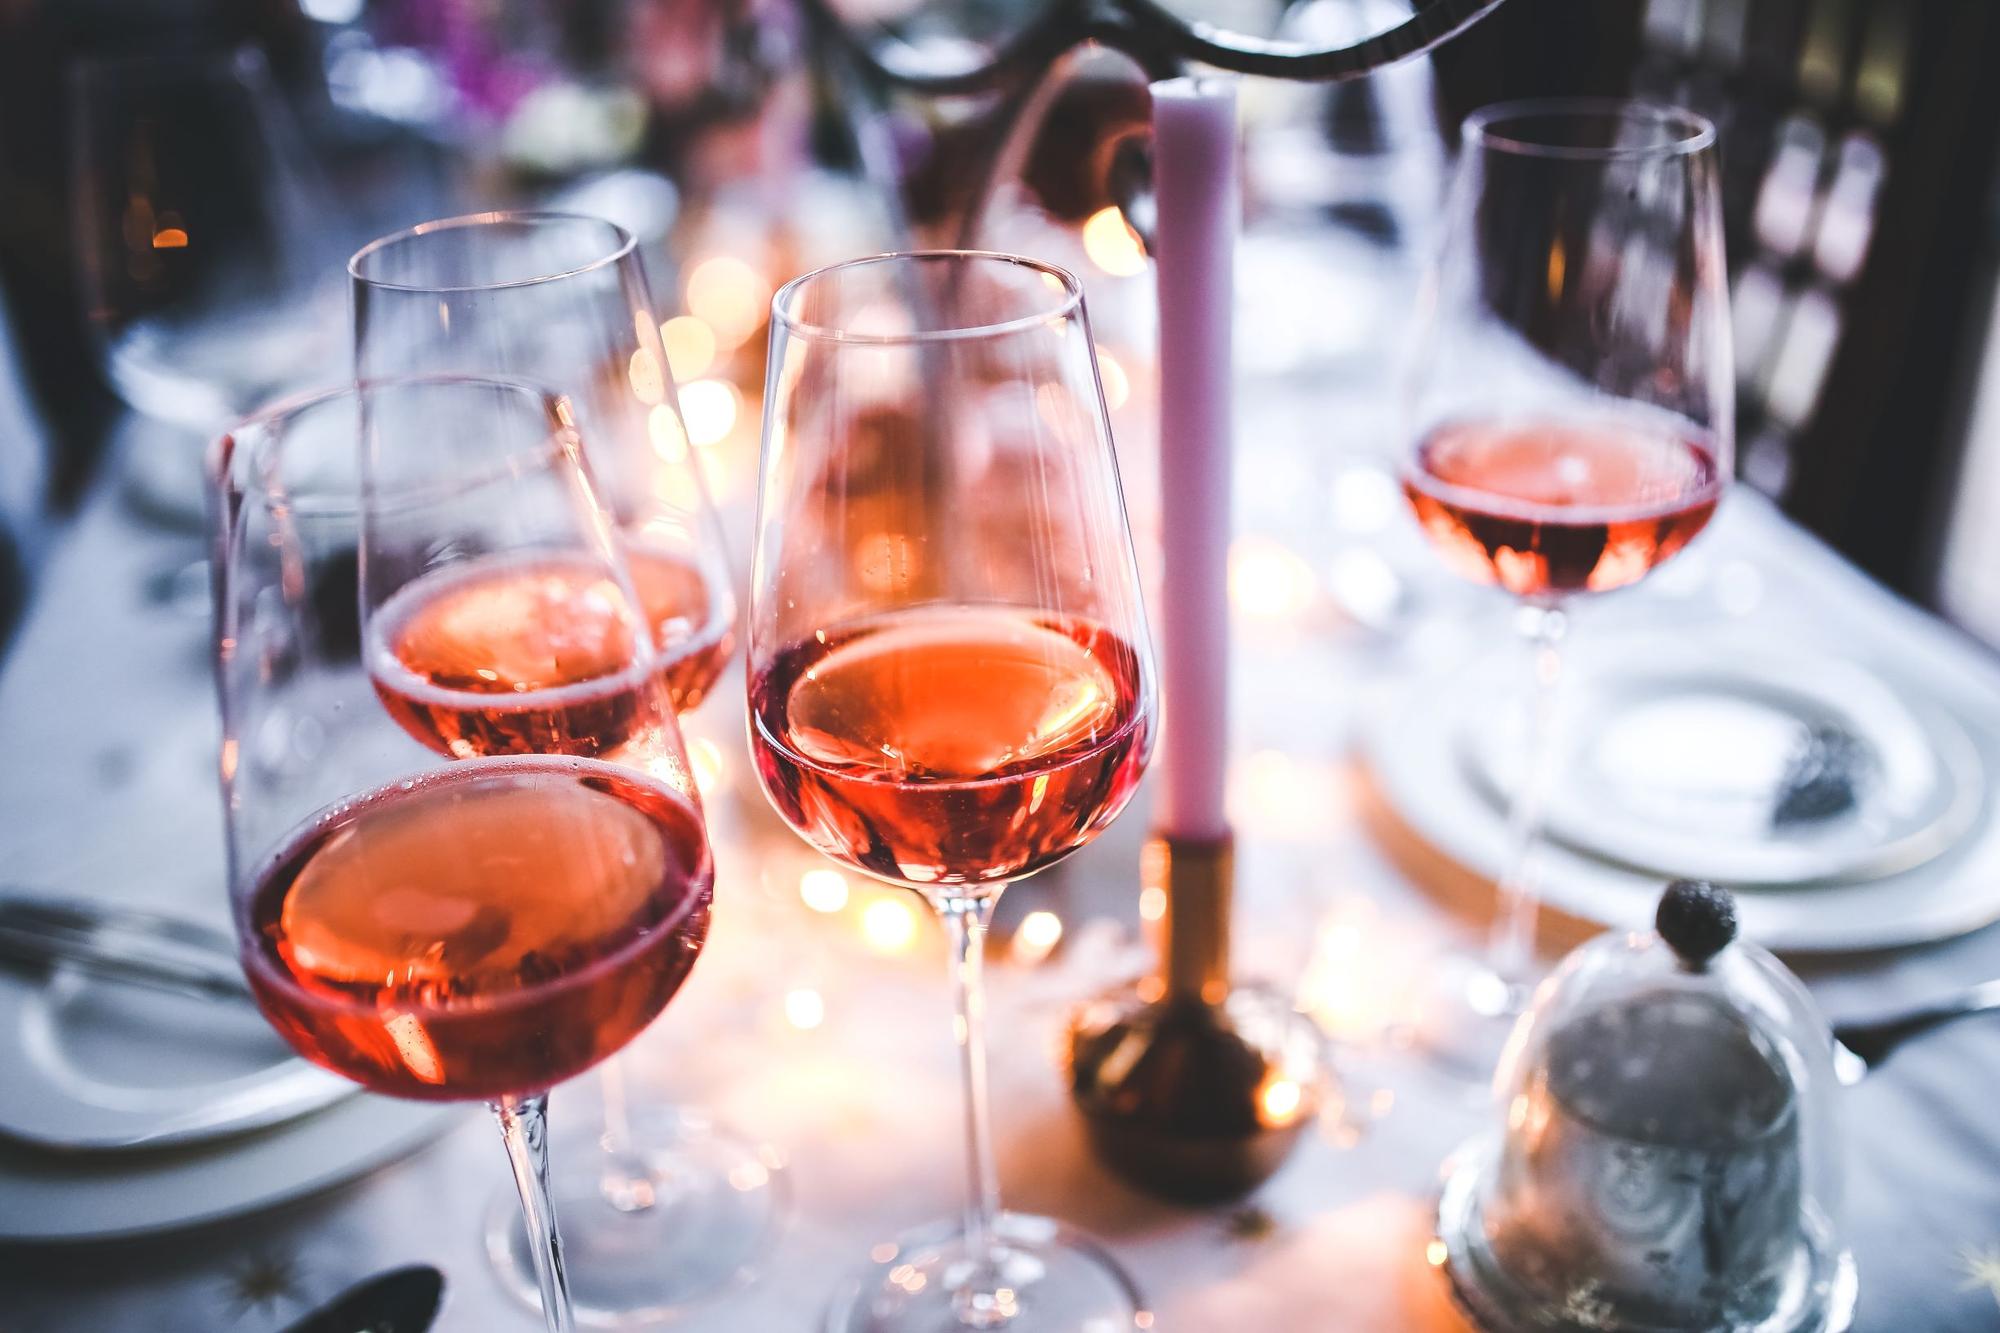 The ultimacy of rosé wines